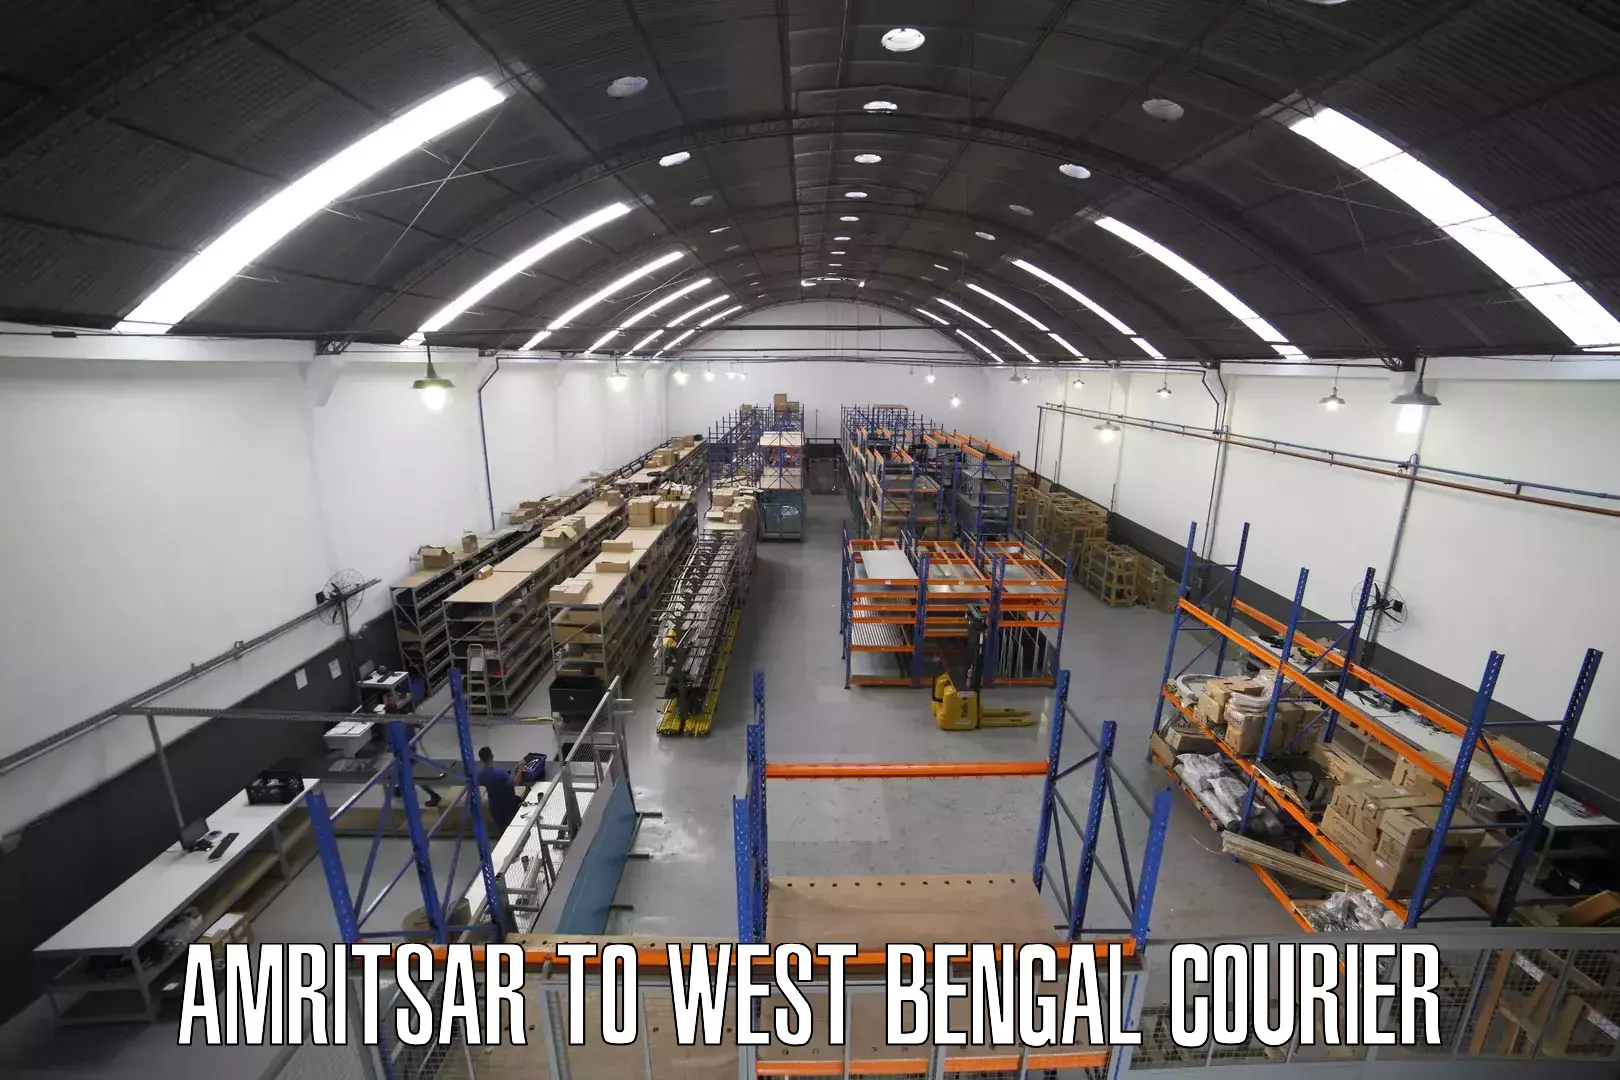 International courier networks Amritsar to West Bengal